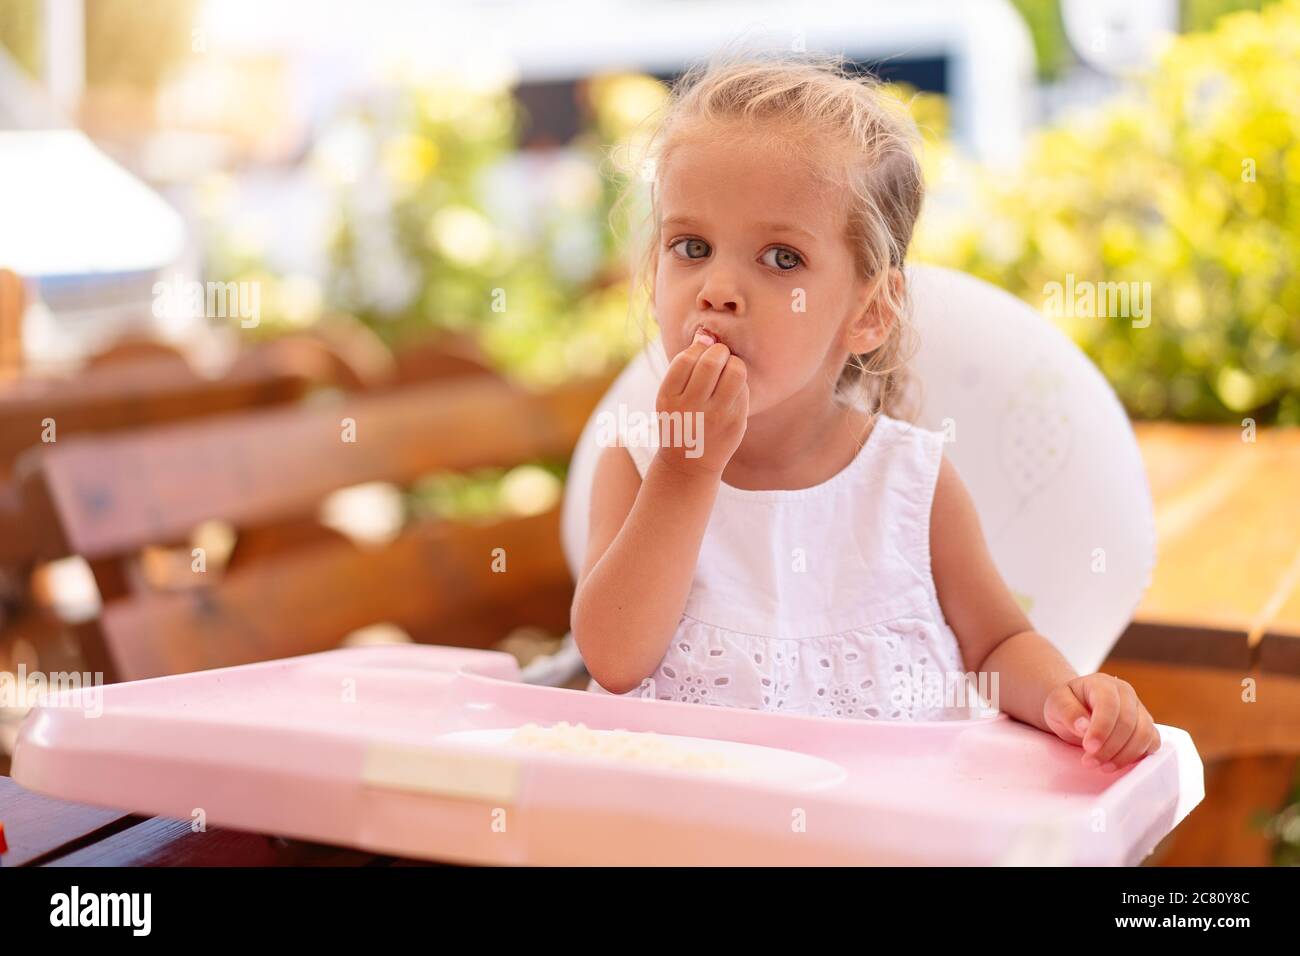 Cute little Caucasian girl eating spaghetti at table sitting in child seat outdoor restaurant. Healthy eating. Funny child eat street food sunny summer day. Stock Photo